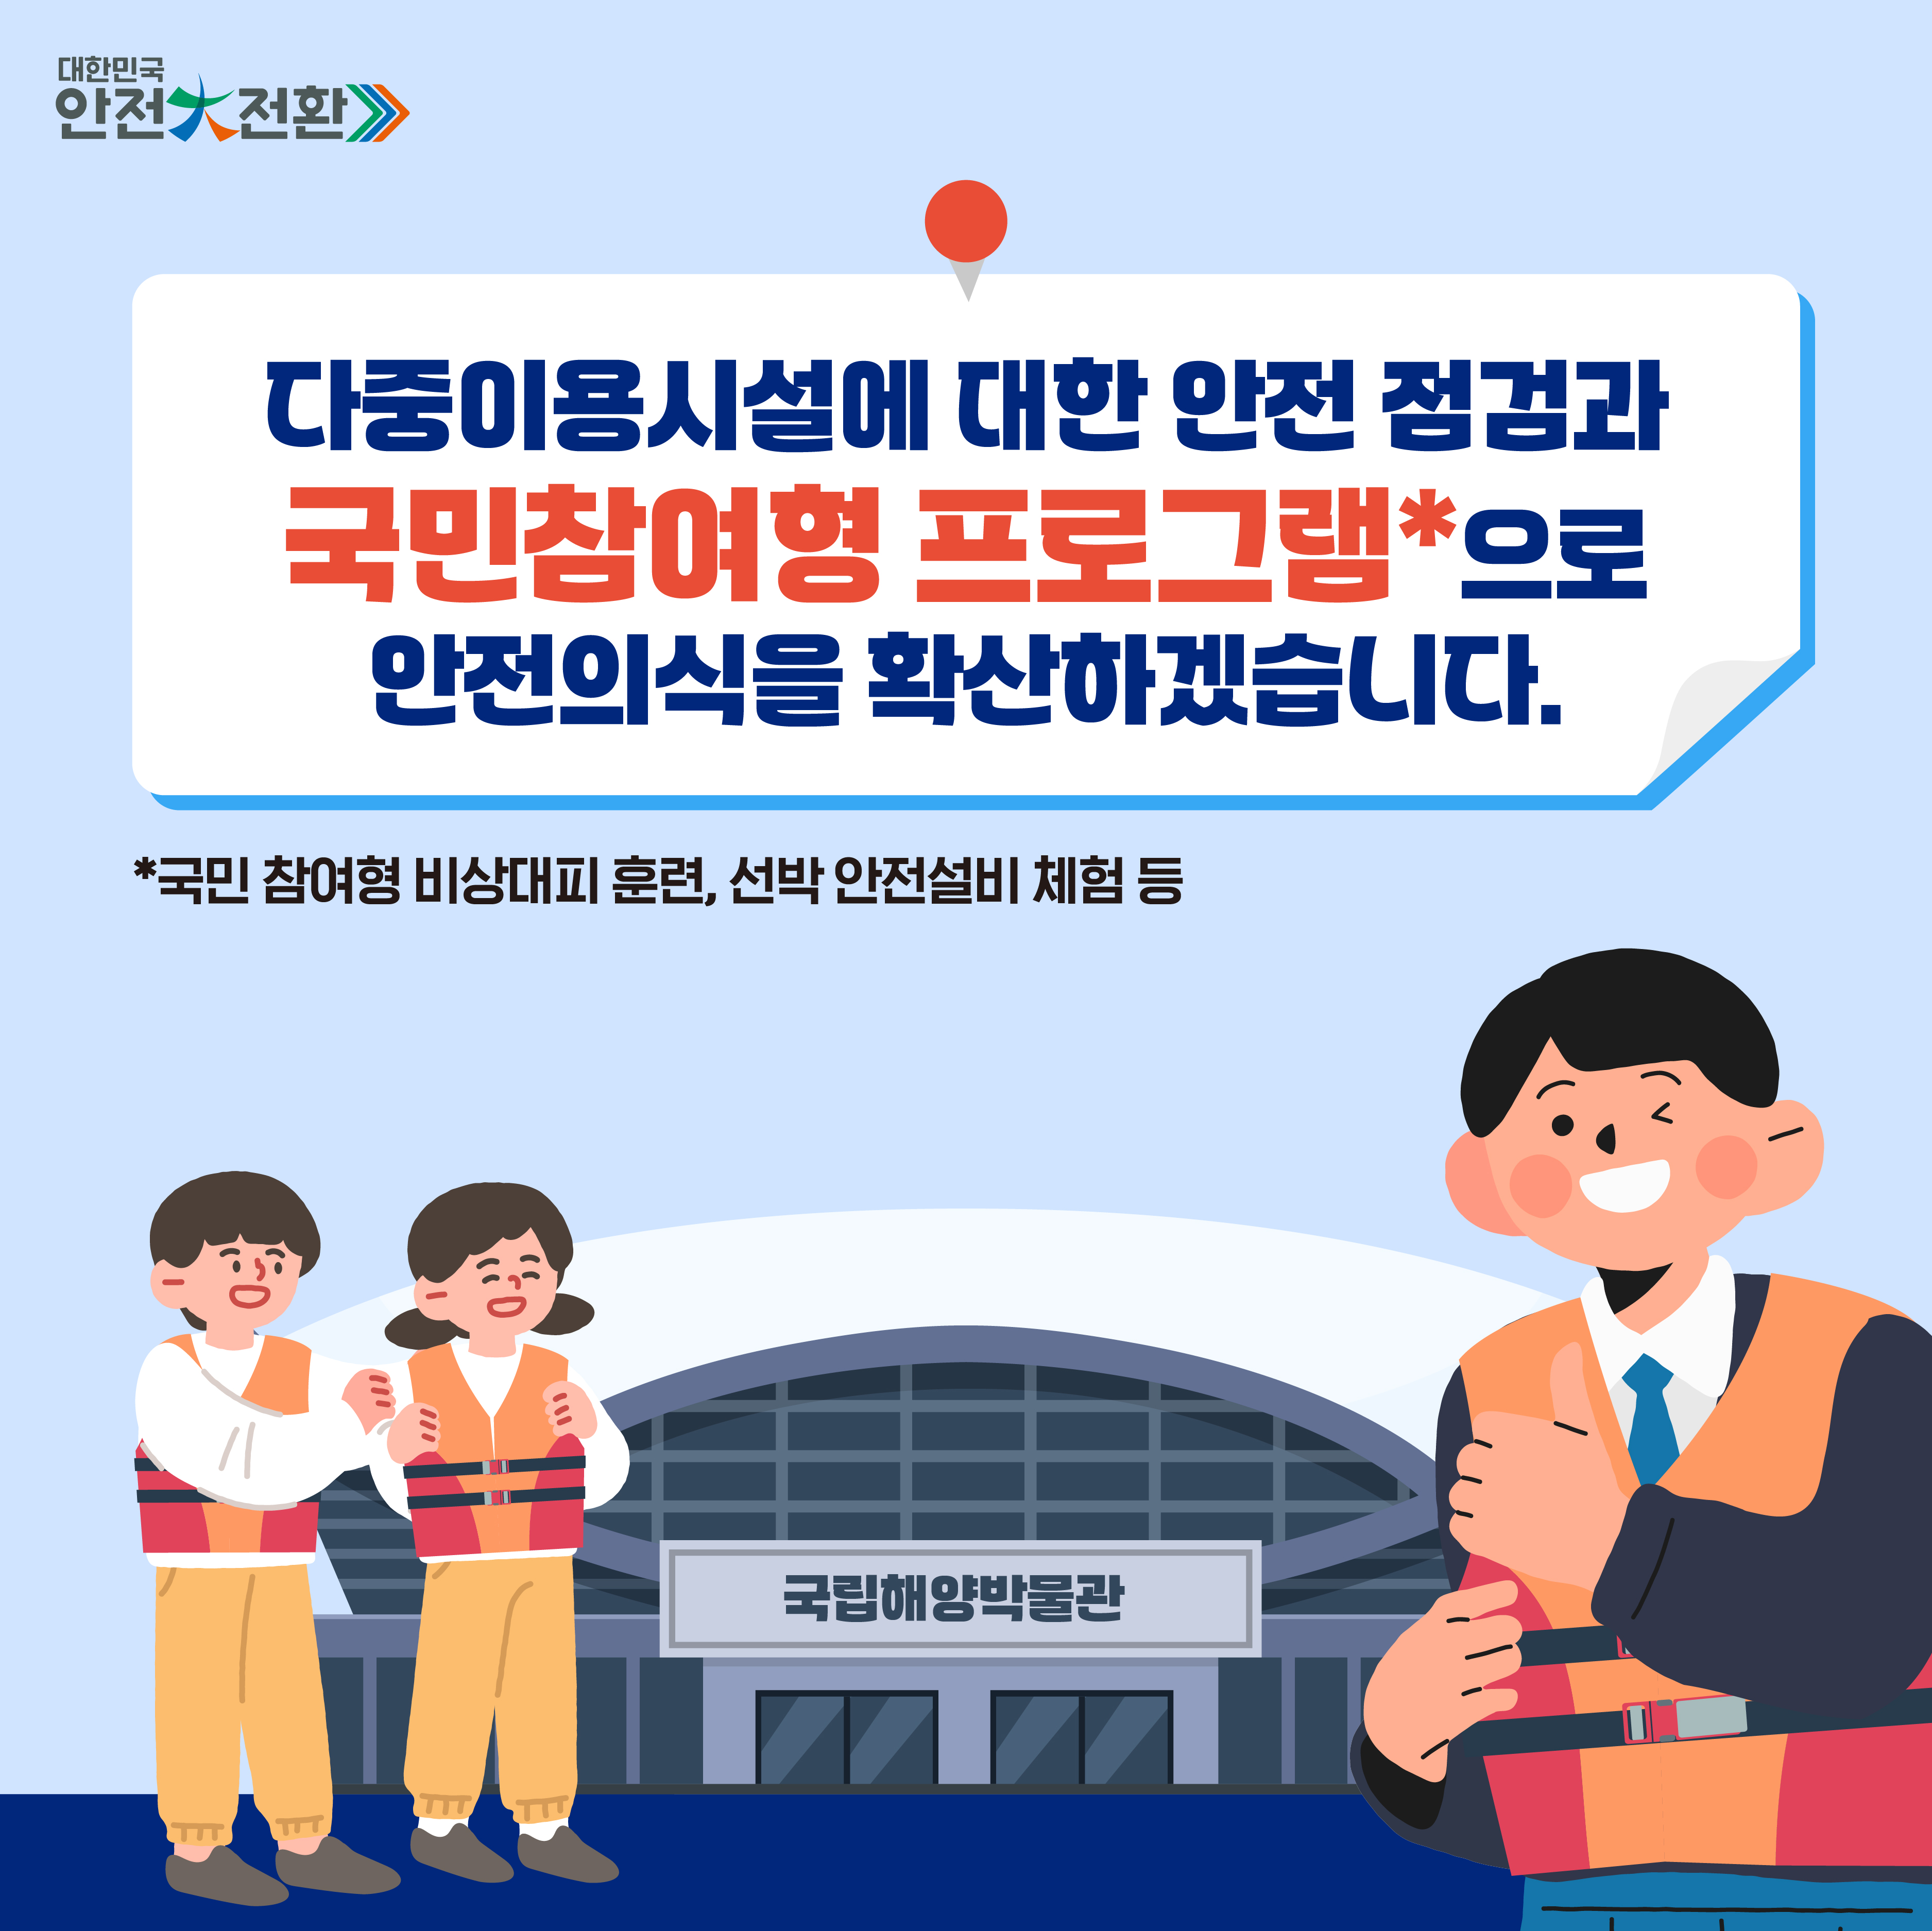 https://www.komsa.or.kr/kor/;jsessionid=1E1BF2718BEE726688175B26A2C4329A